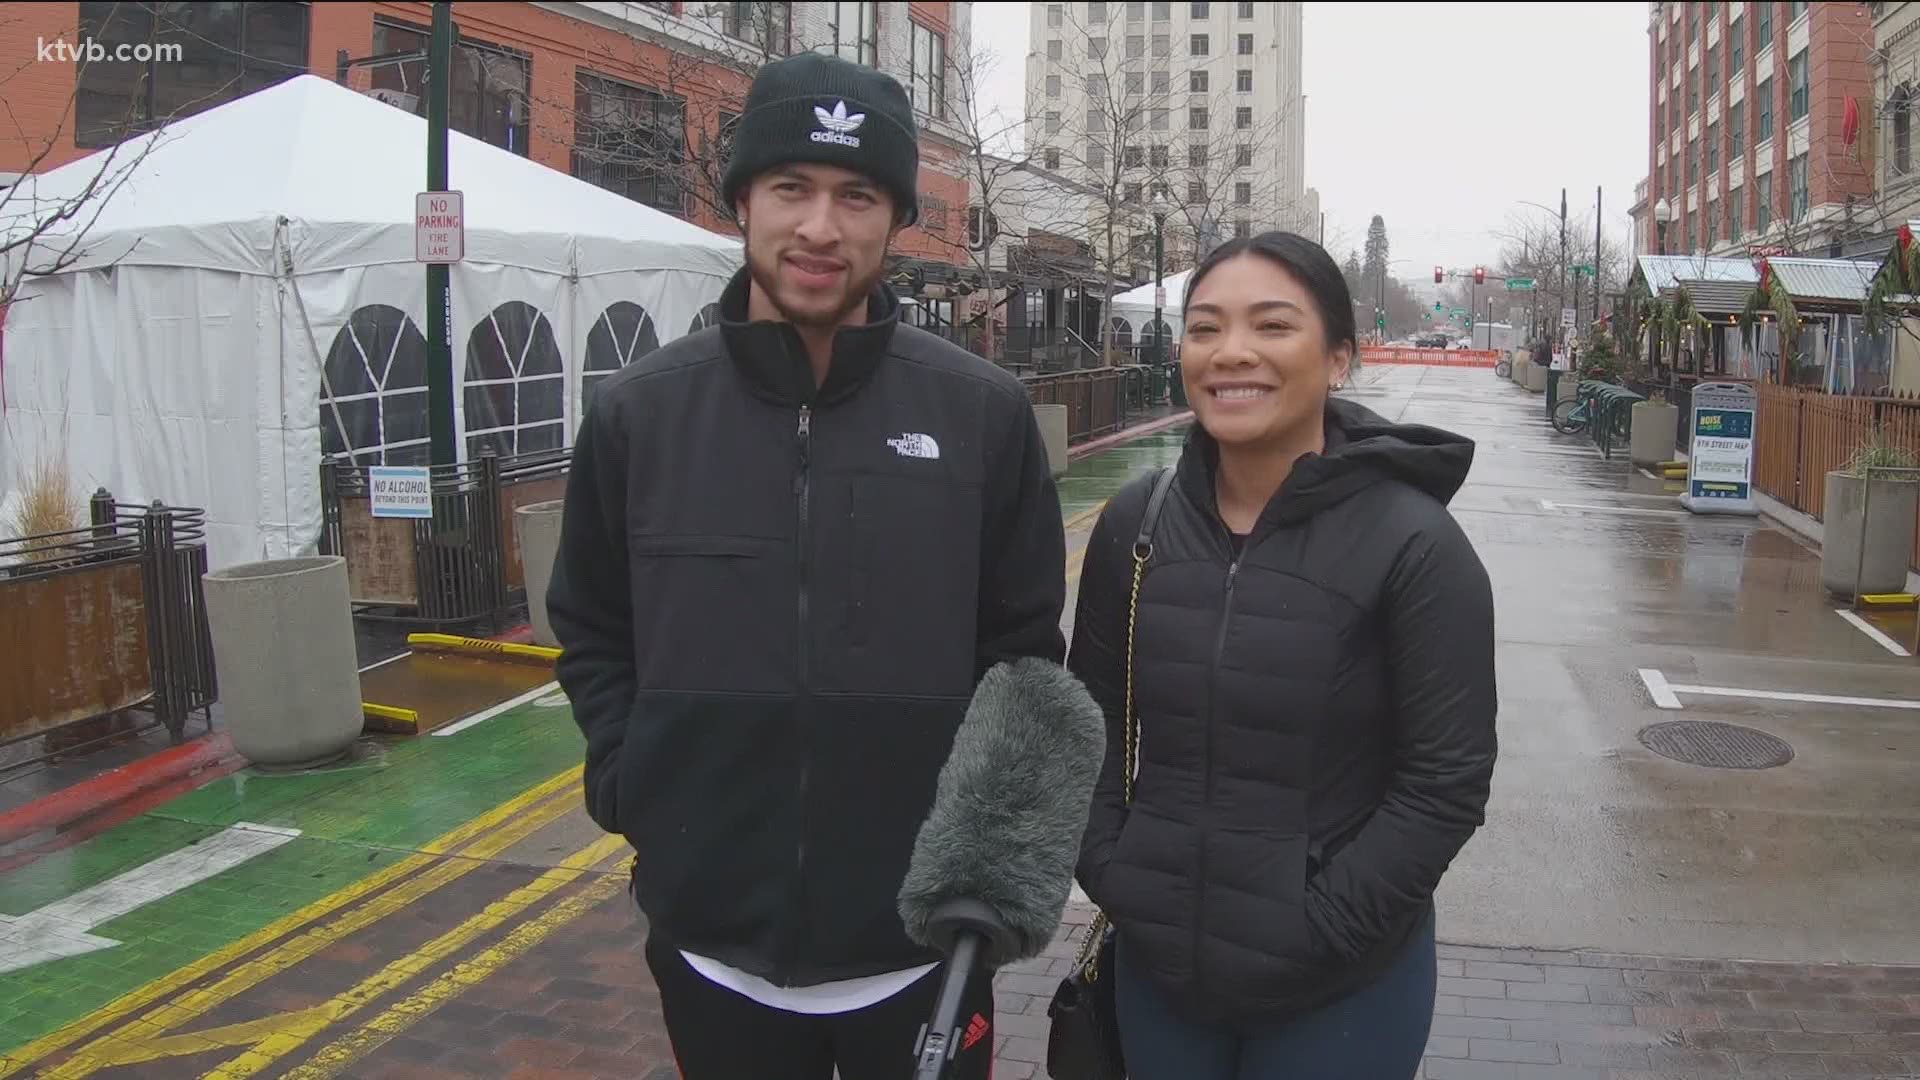 We talked with people in downtown Boise about what they are hoping for in the new year.